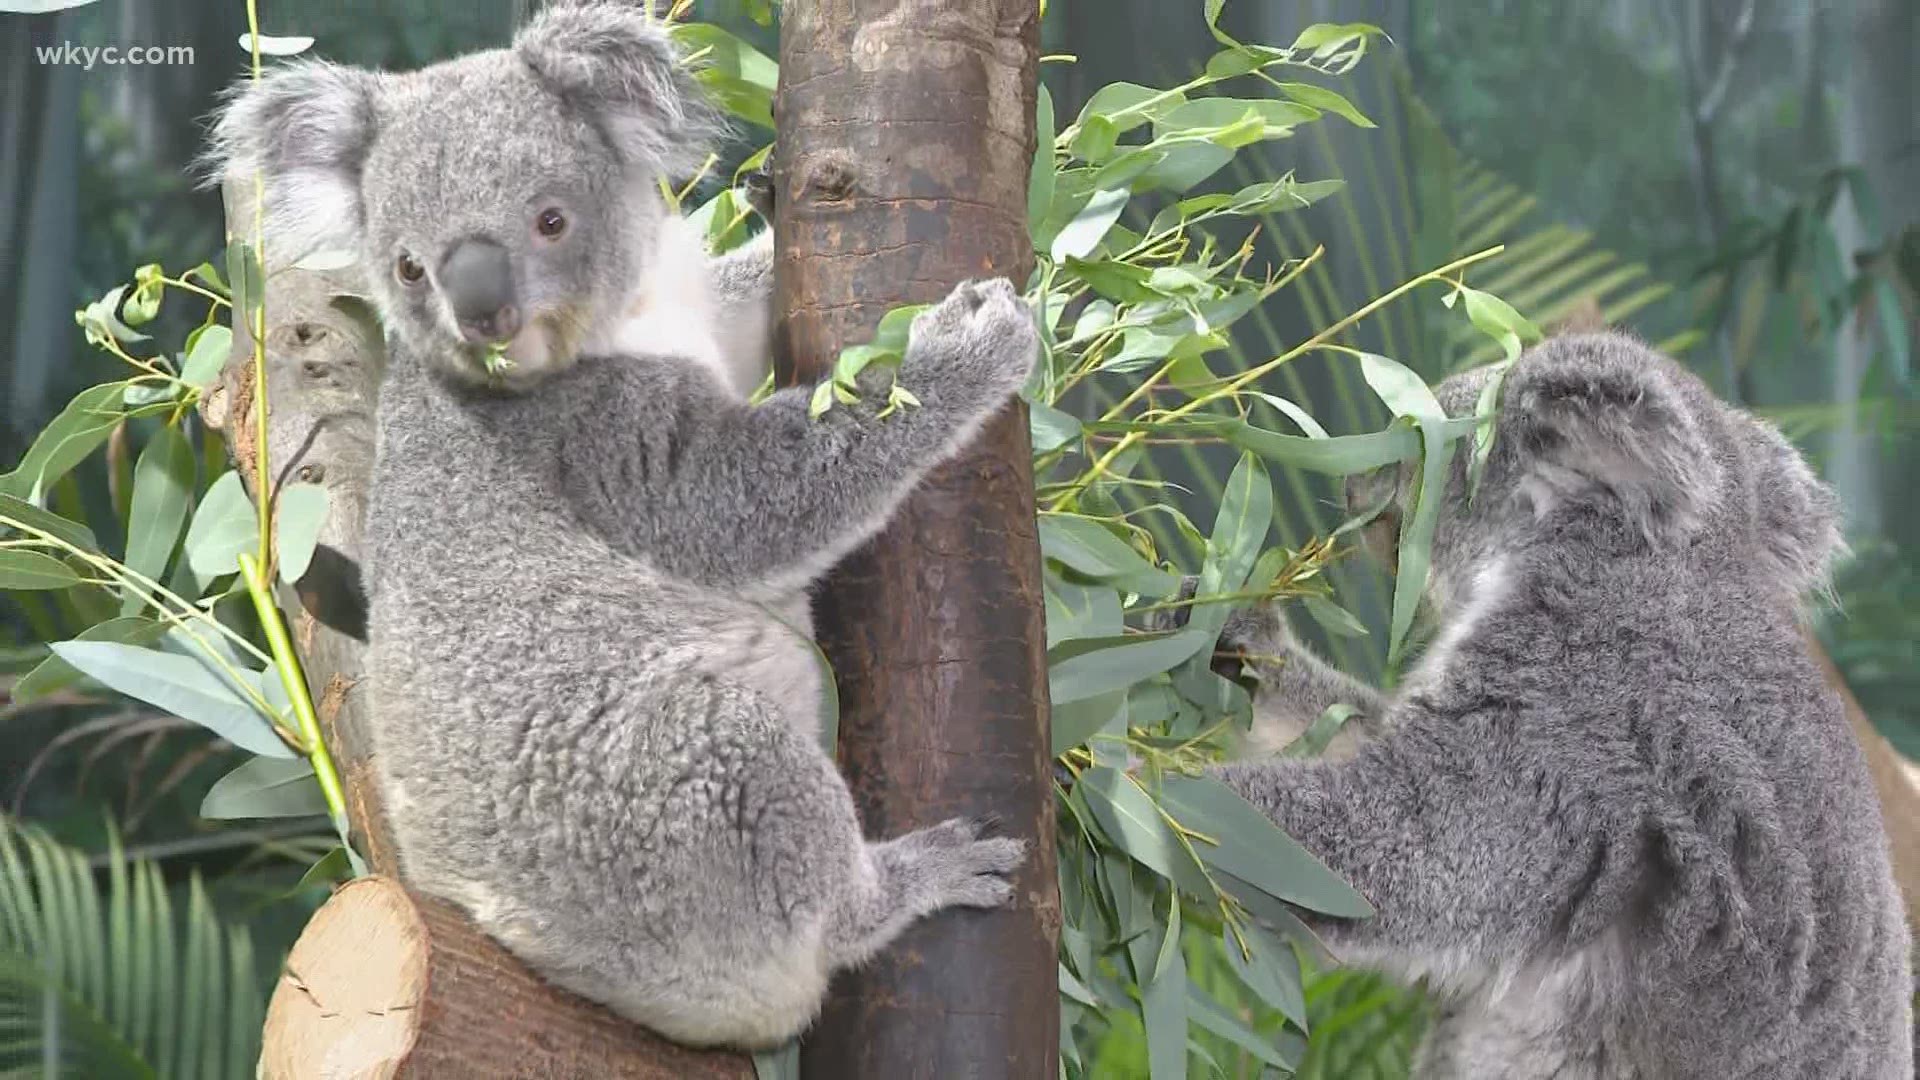 We're getting to know the koalas at the Cleveland Metroparks Zoo.